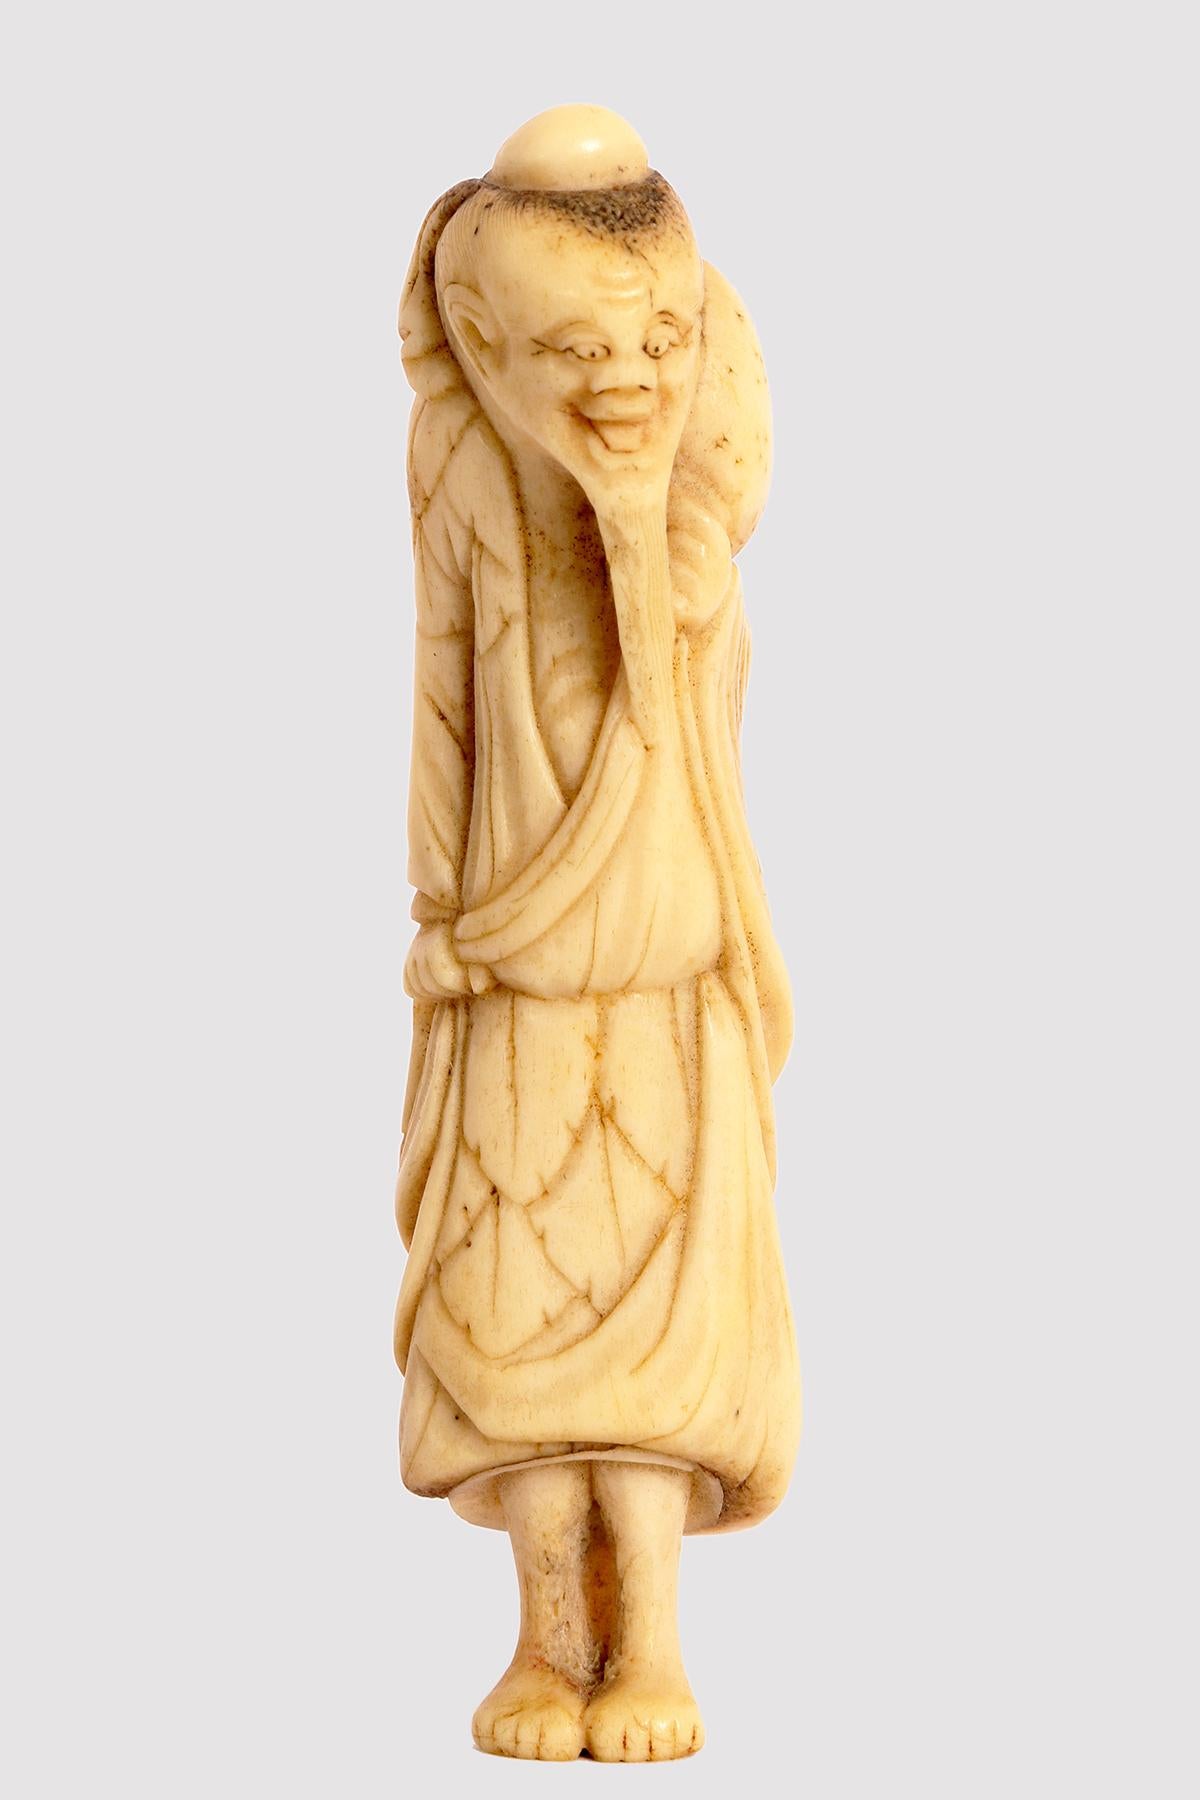 Netzuke in carved bone, representing a wise old traveler with a long beard, and wrapped in a rich robe.
On the shoulder is a dried gourd to carry water. Japan, Edo period (1603-1868), late 18th century.